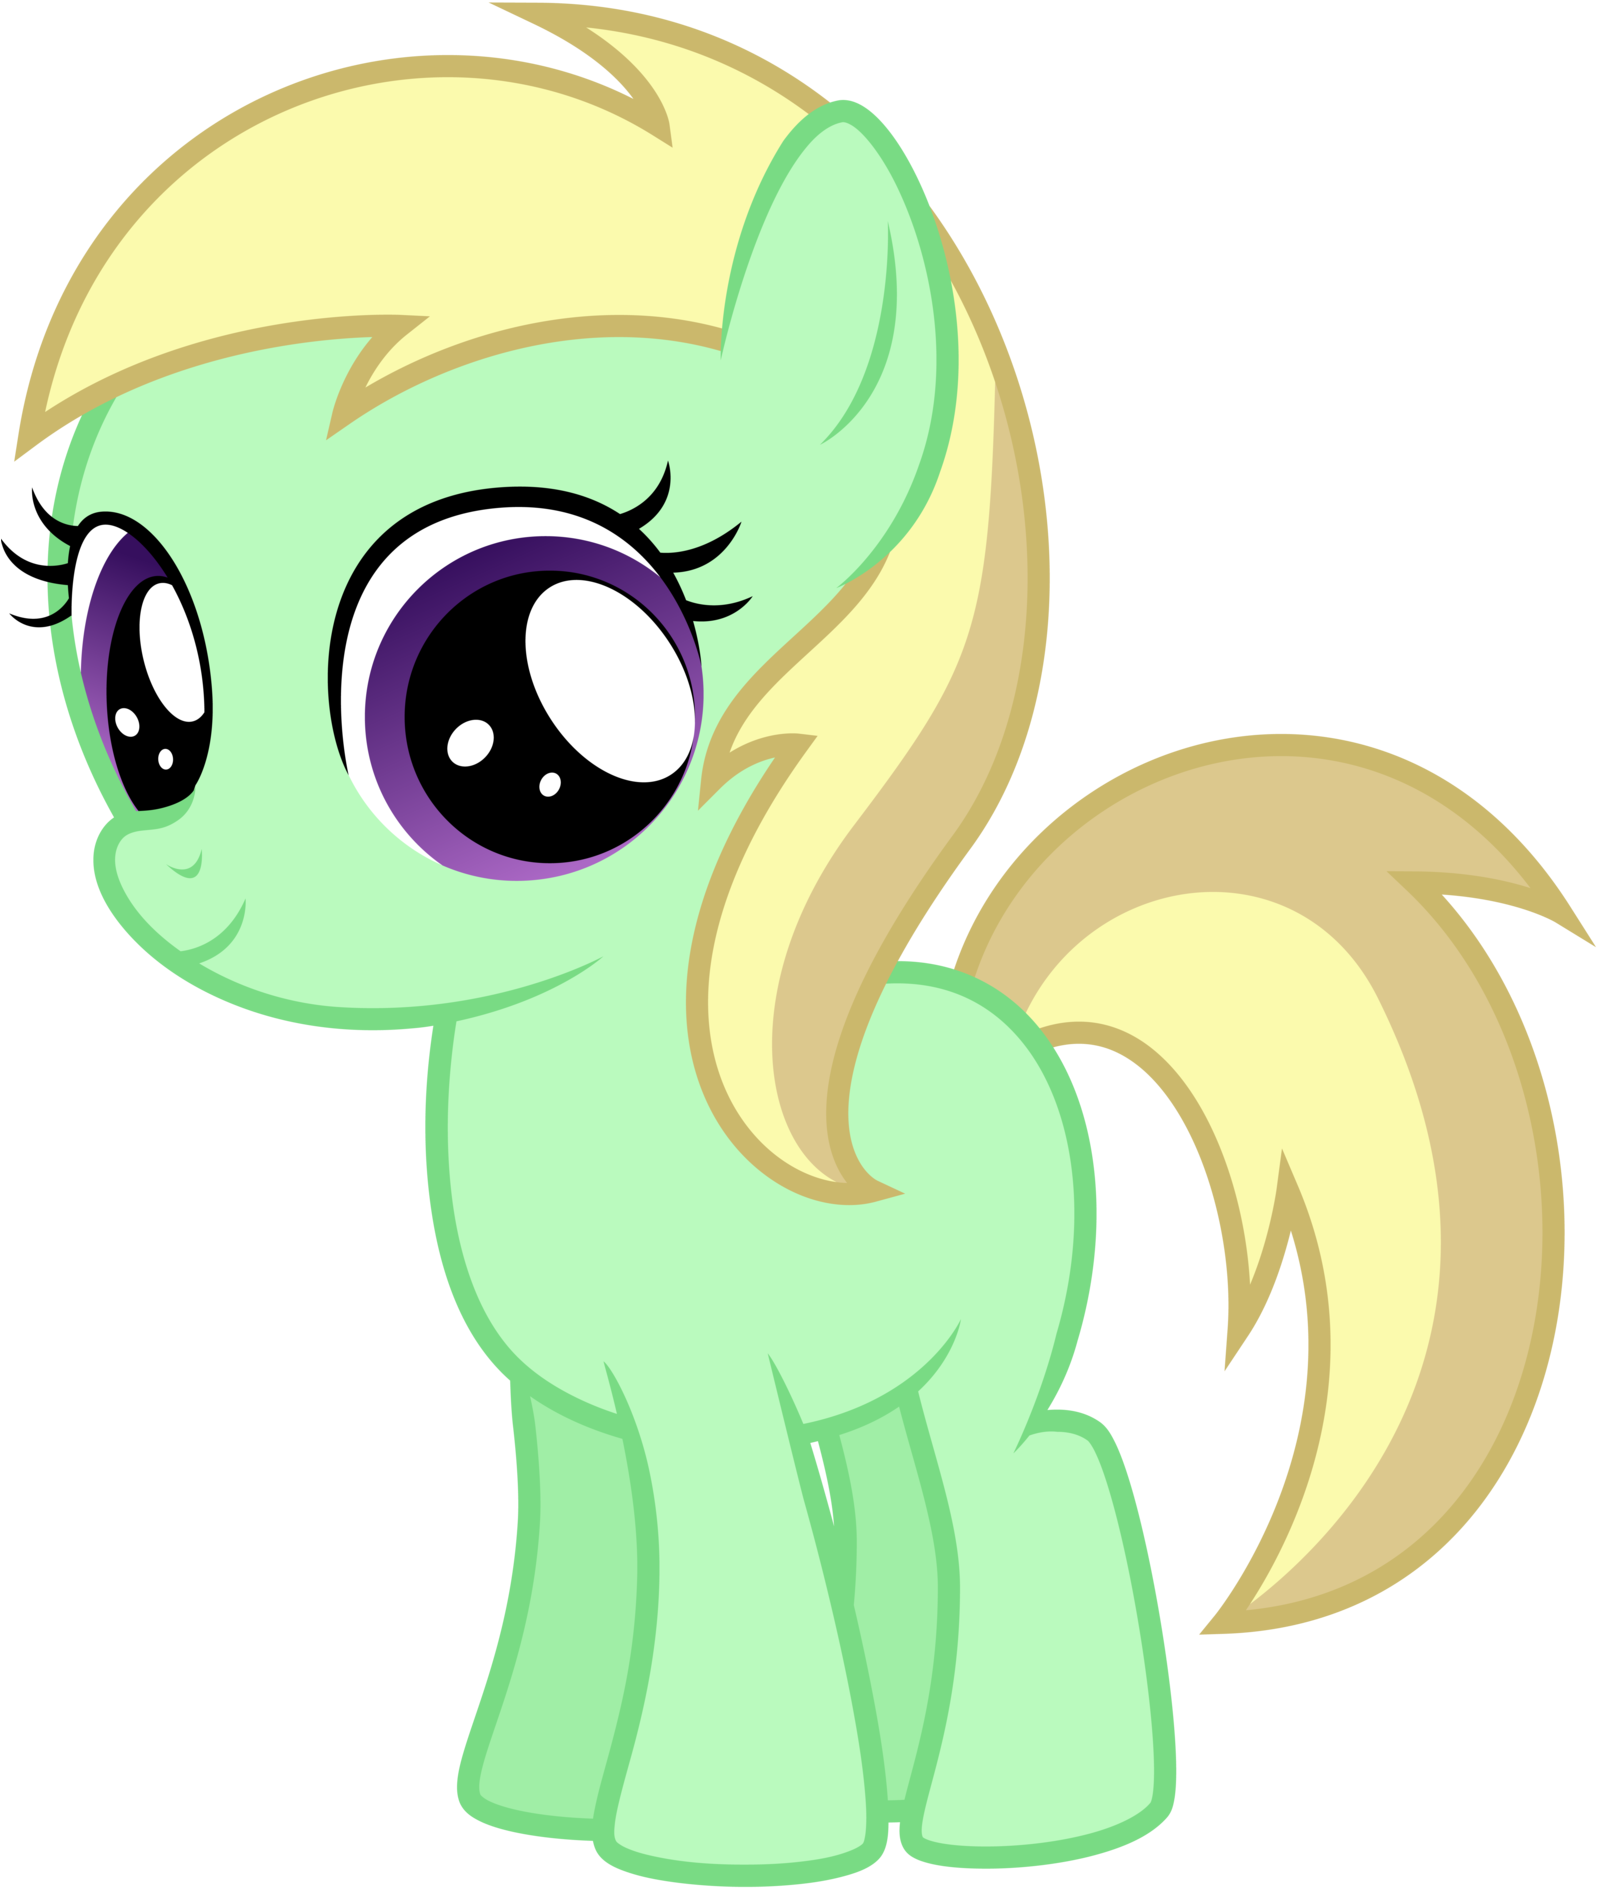 Apple Mint Smiling By Thatguy1945 Apple Mint Smiling - My Little Pony Apple Mint (1600x1924)